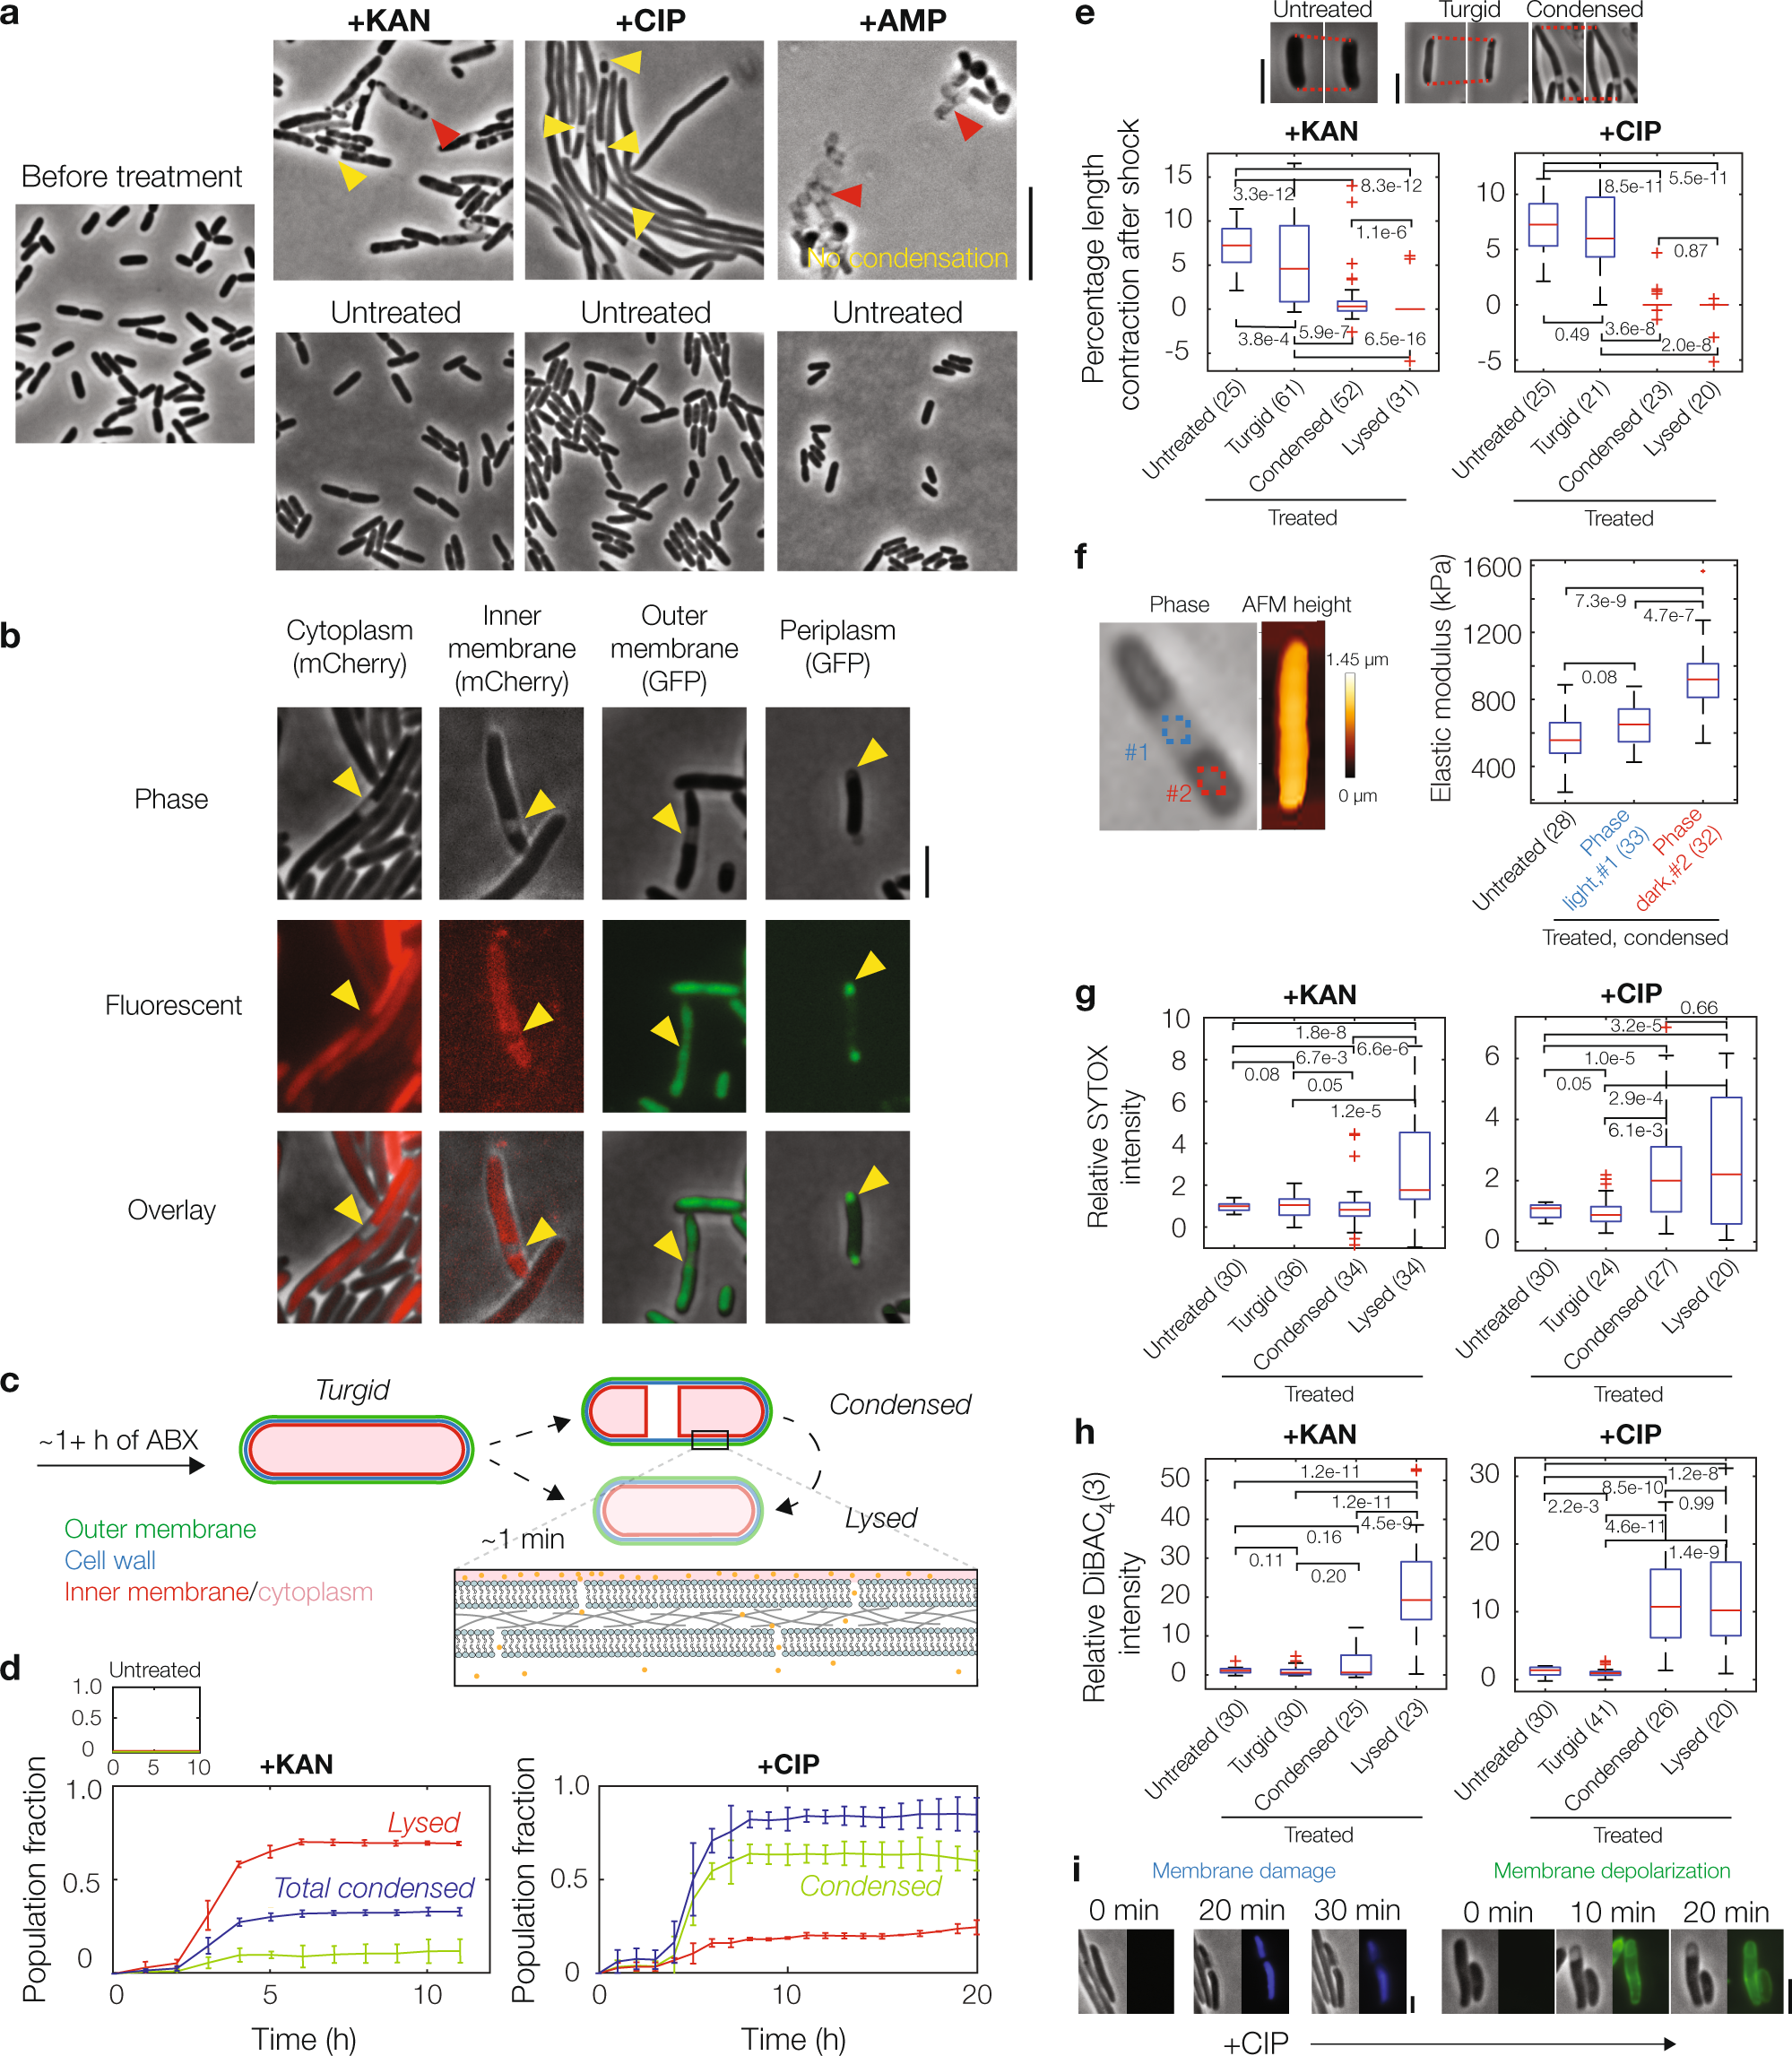 Cytoplasmic condensation induced by membrane damage is associated with  antibiotic lethality | Nature Communications